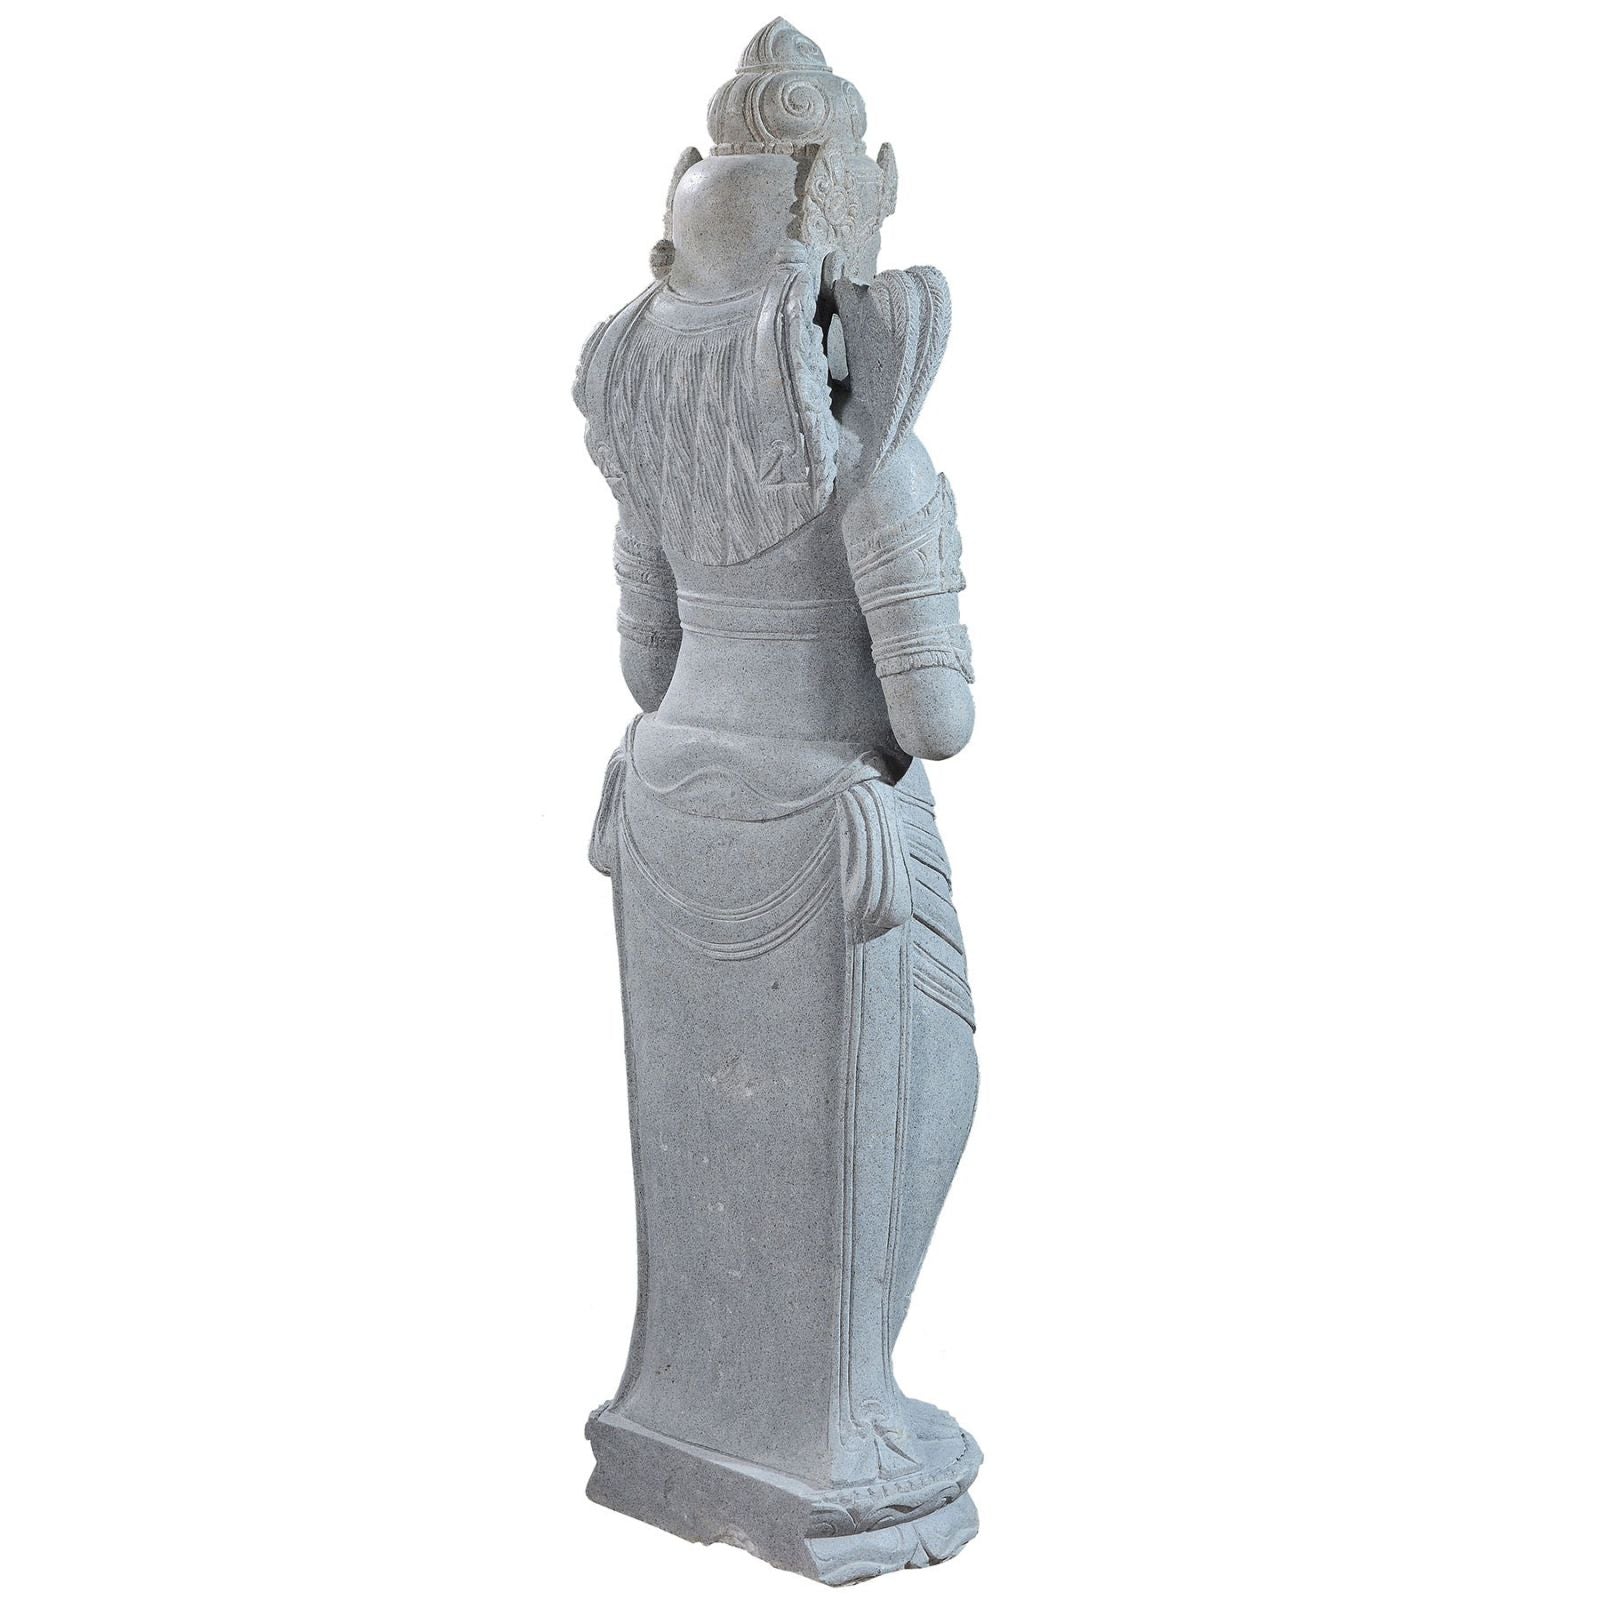 Large garden Stone statue of standing Dewi Sri - Goddess of the earth